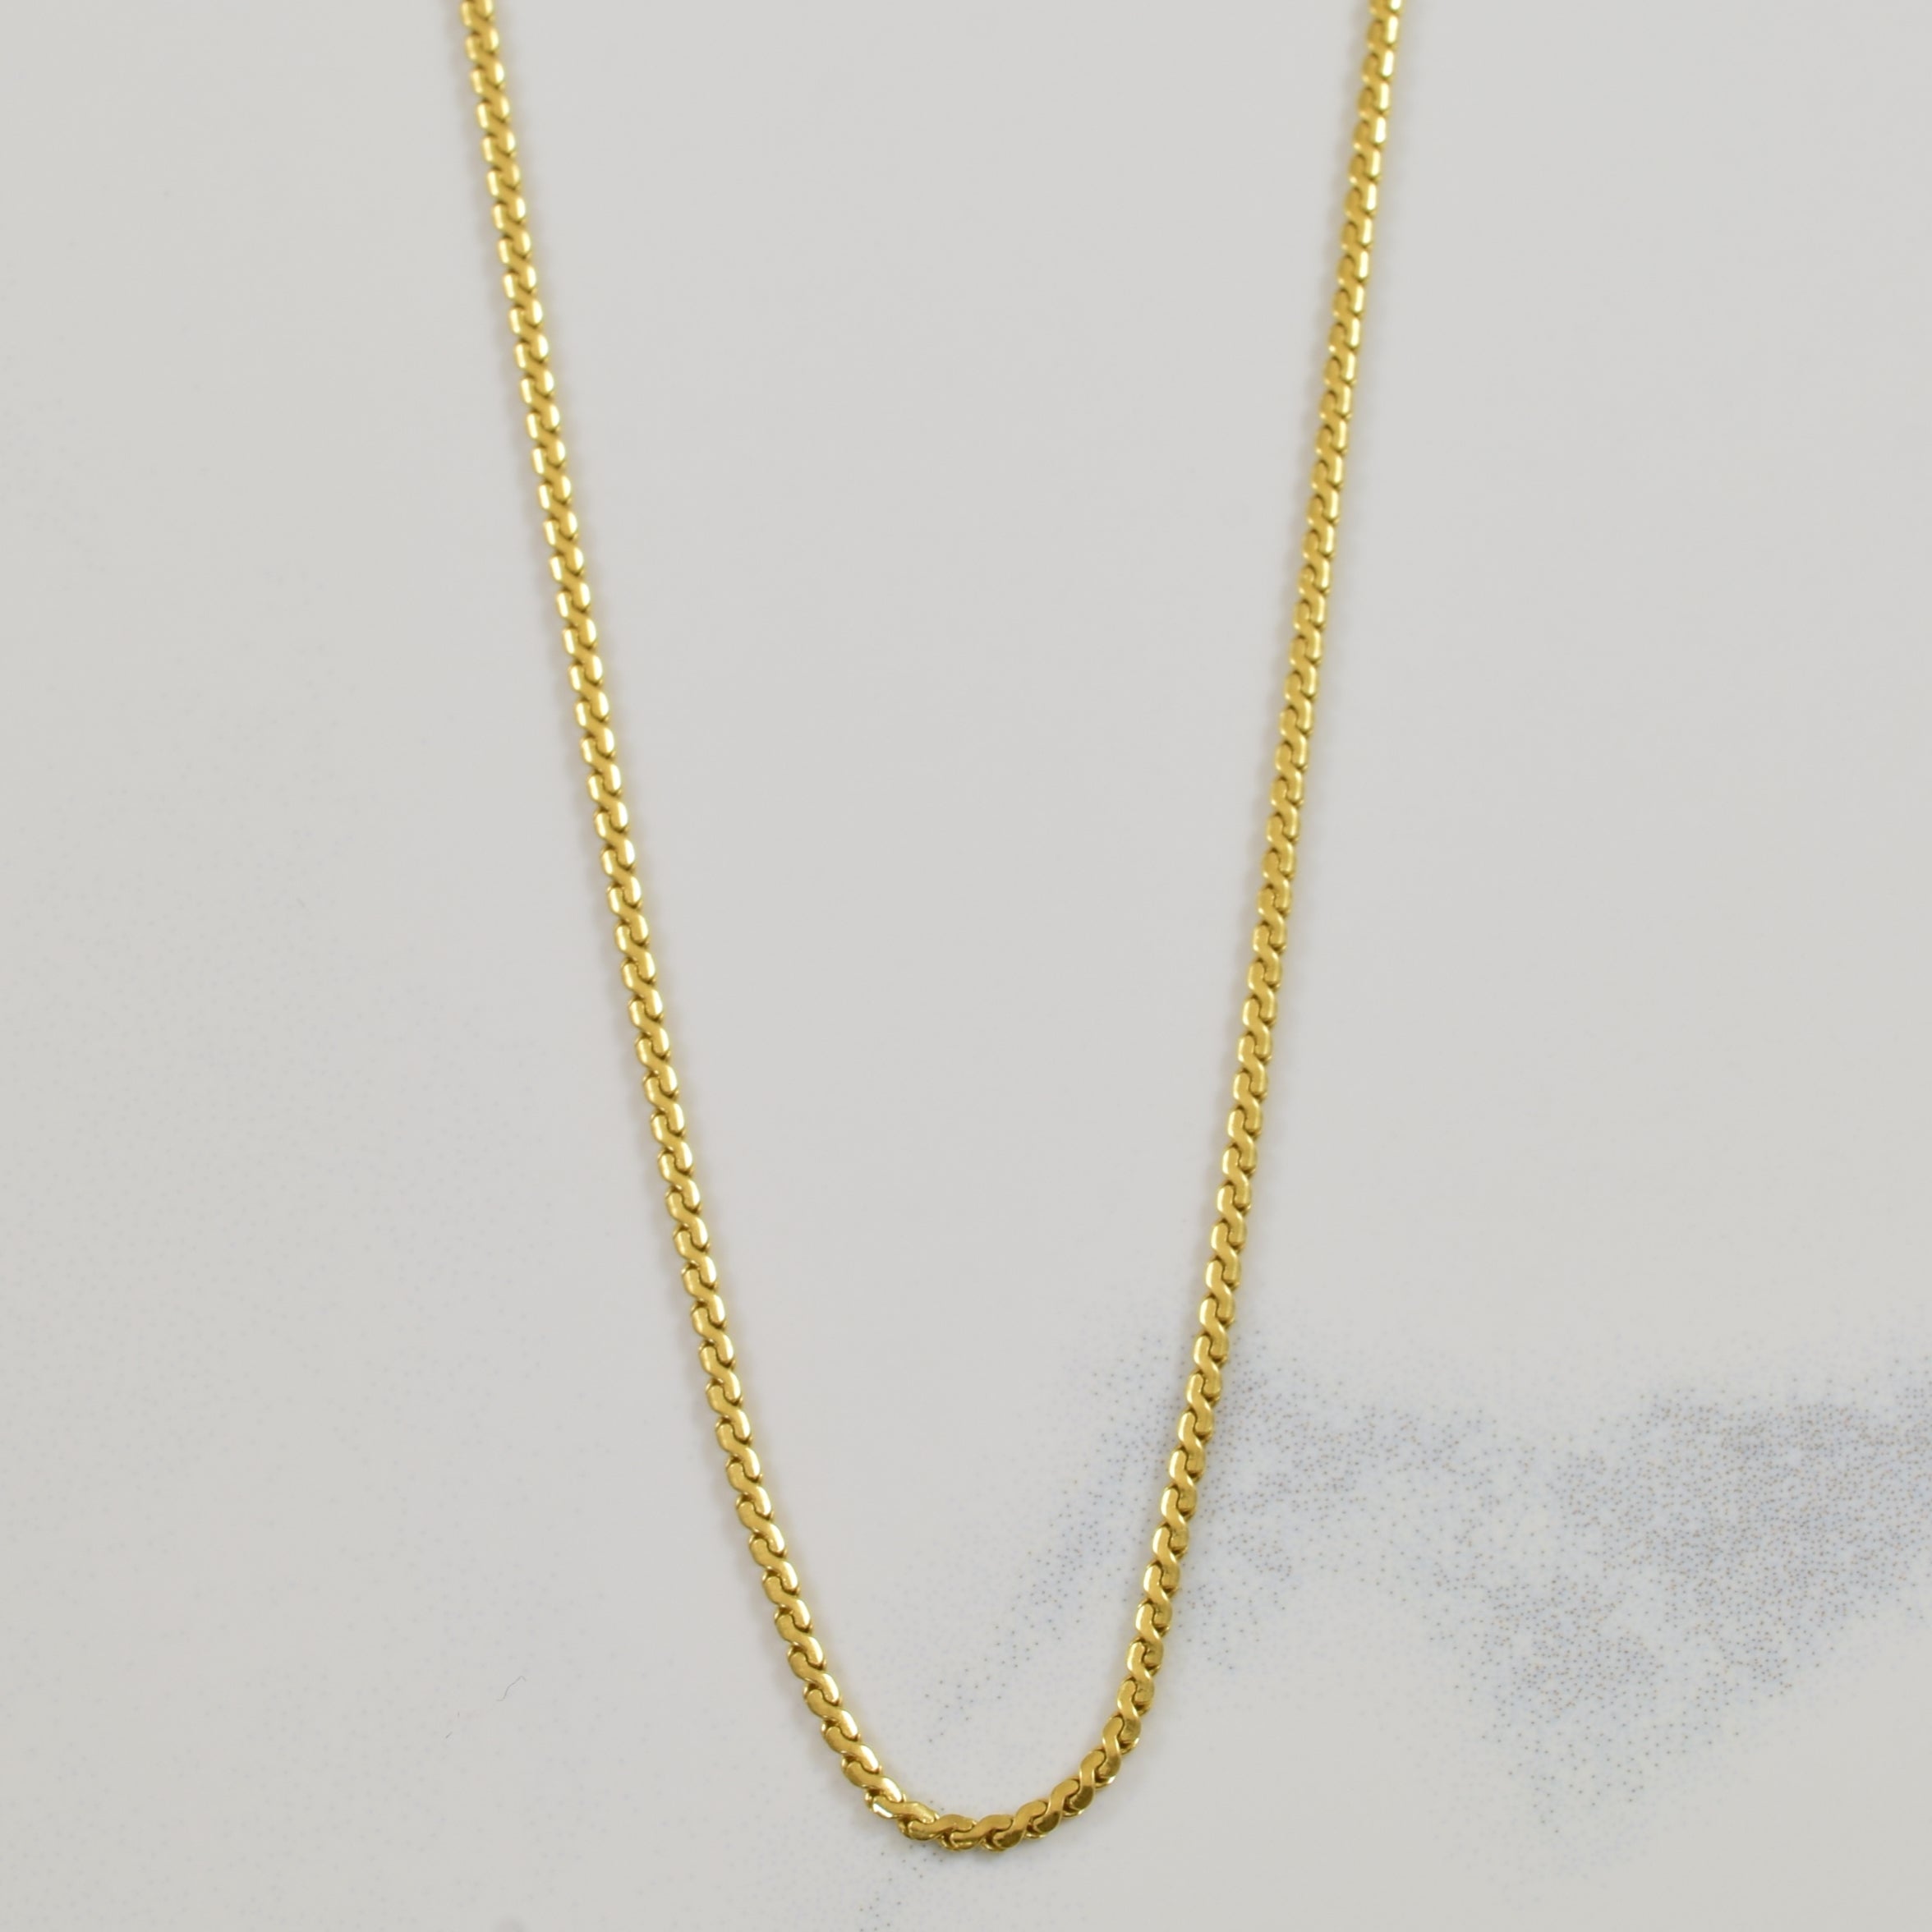 18k Japan Gold Serpentine Necklace 45CM – HLY Avenue Jewelry